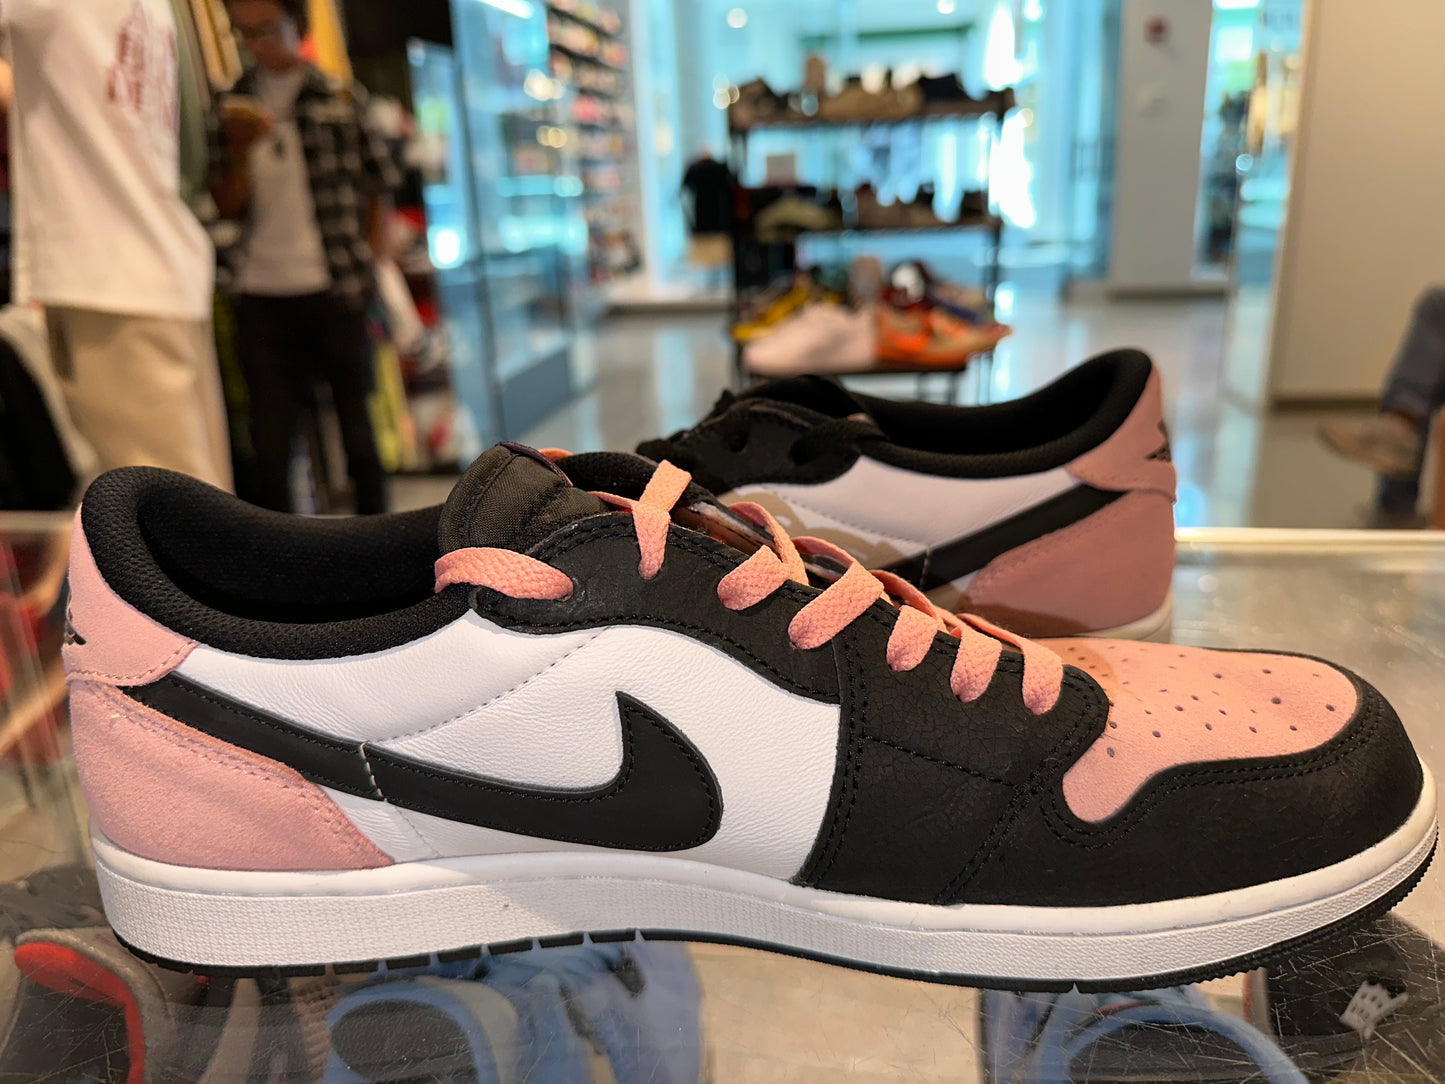 Size 13 Air Jordan 1 Low “Bleached Coral” (Mall)